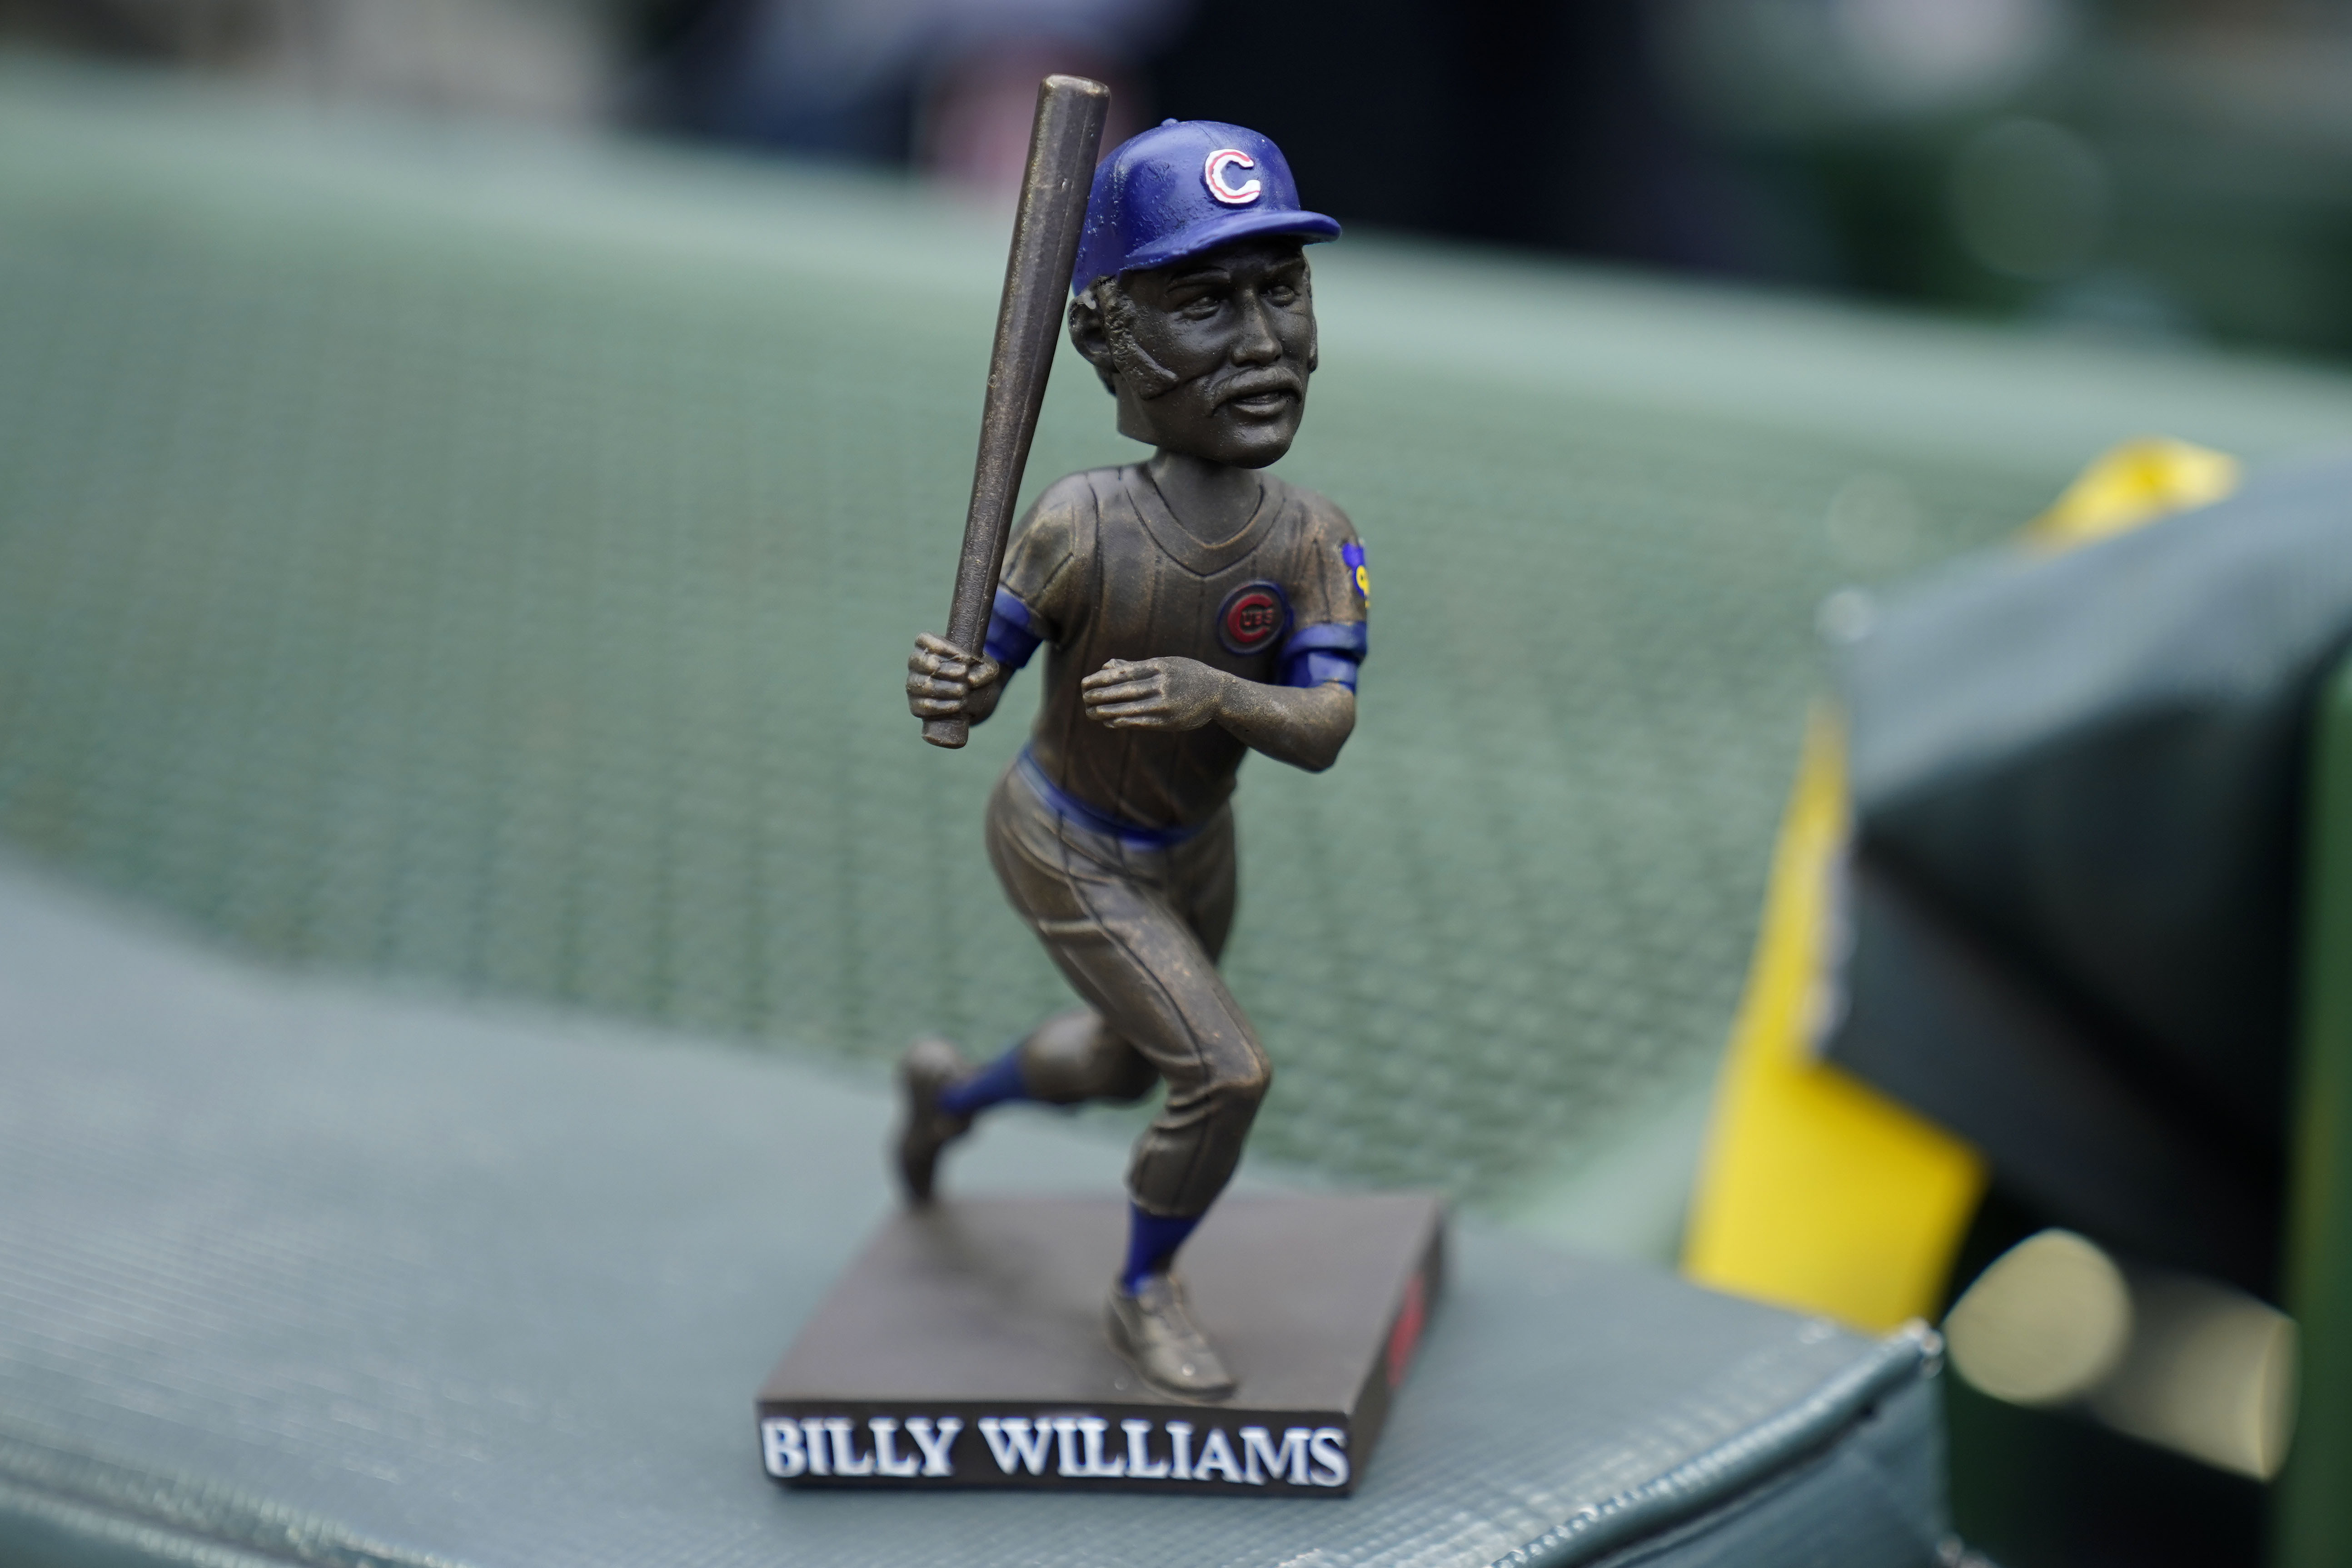 Chicago baseball report: Cubs' Billy Williams bobblehead blunder